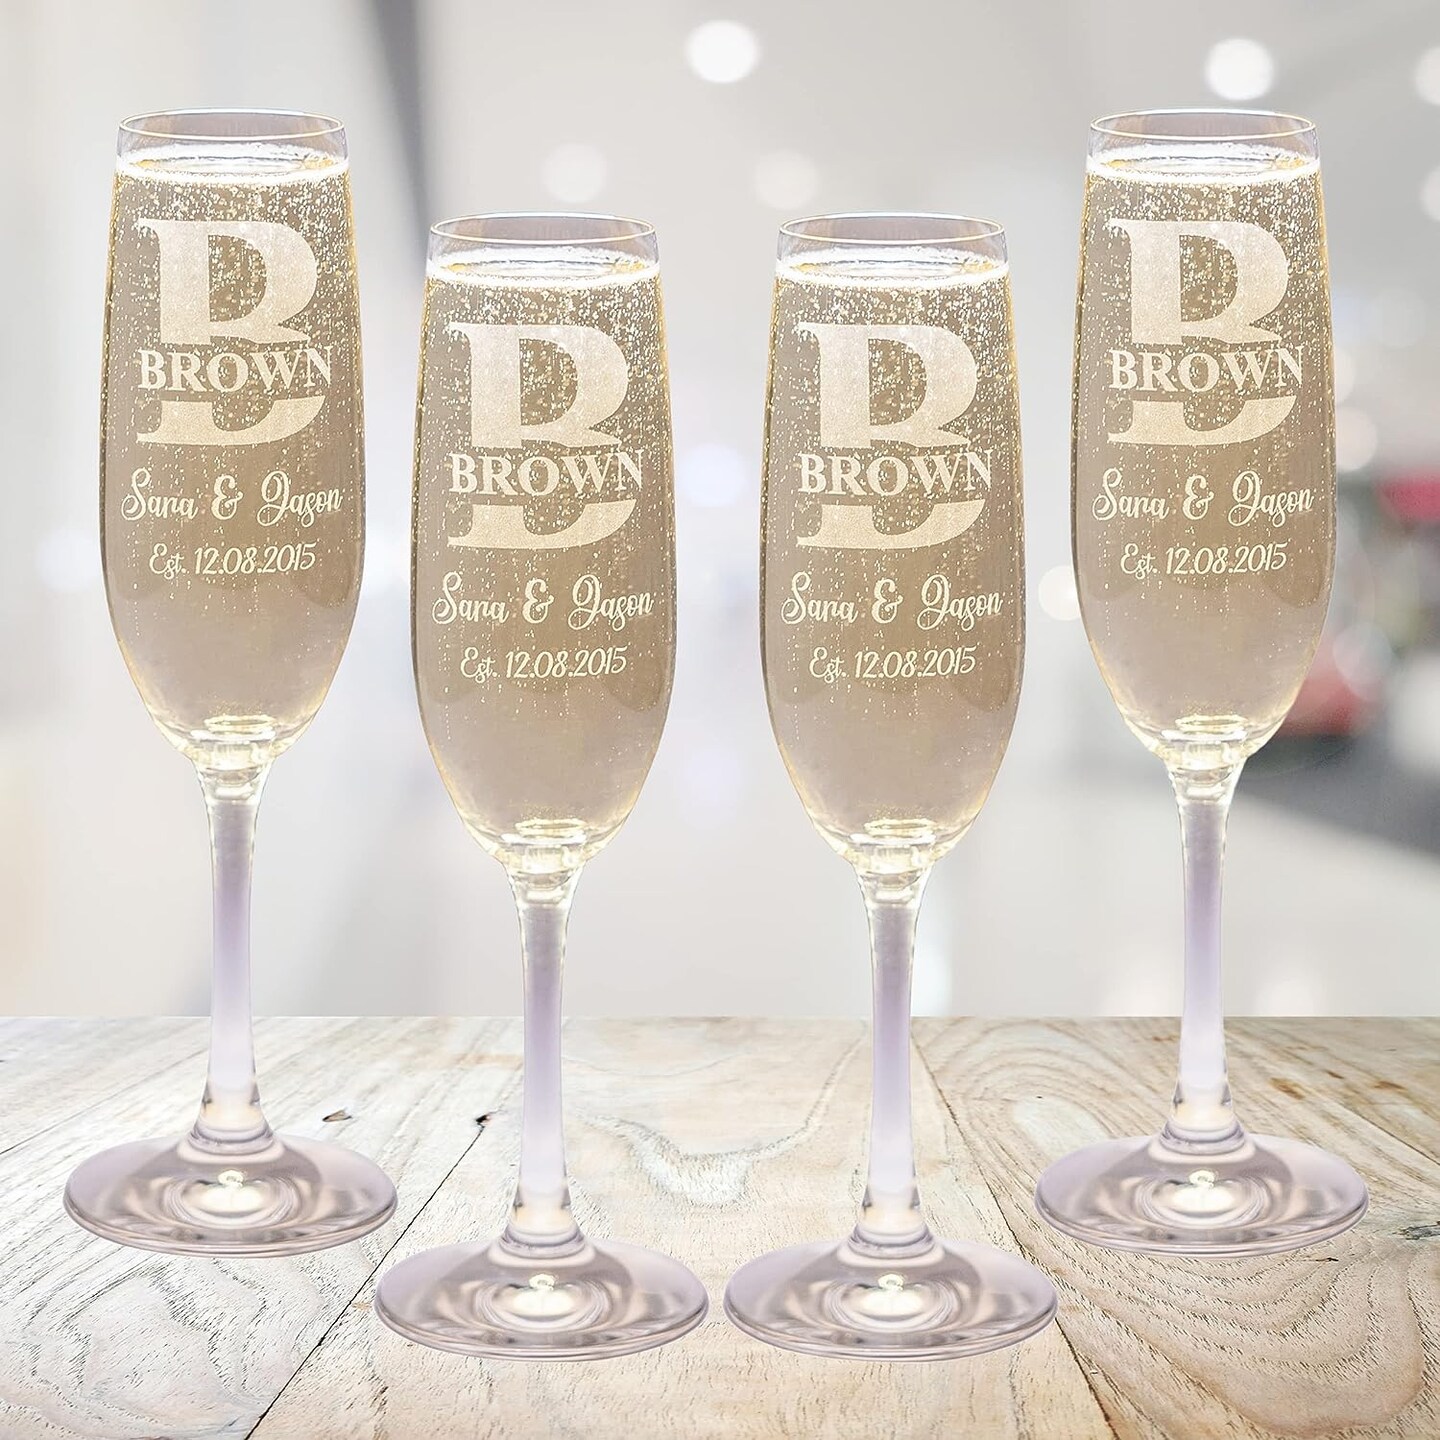 Set of 2 Monogrammed Personalized Wine Glasses